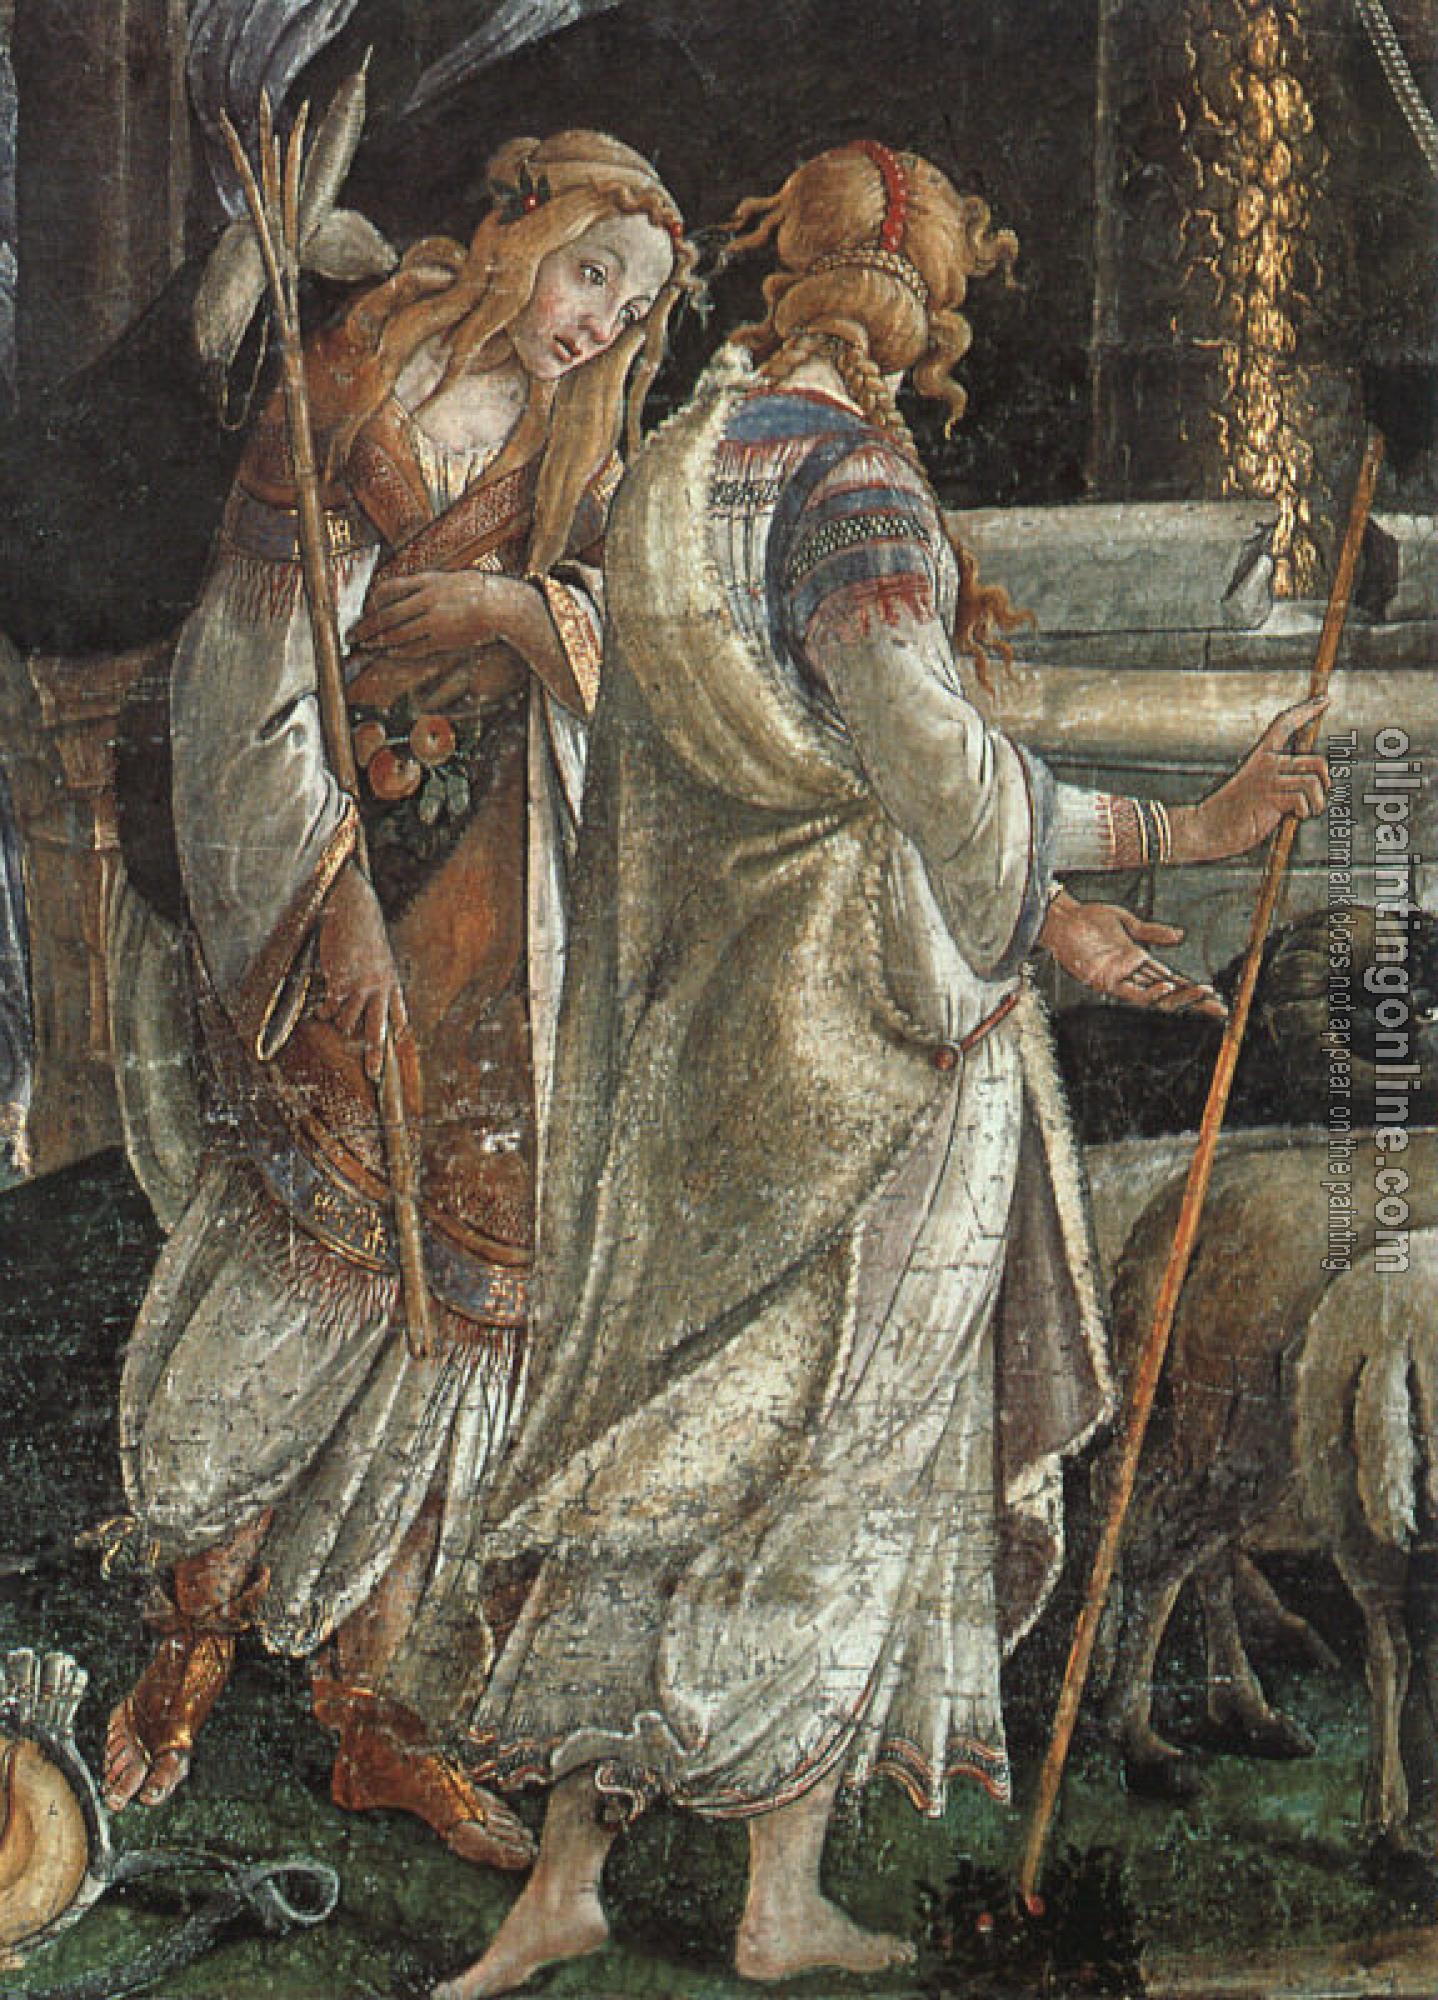 Botticelli, Sandro - Scenes from the Life of Moses, detail of the Daughters of Jethro